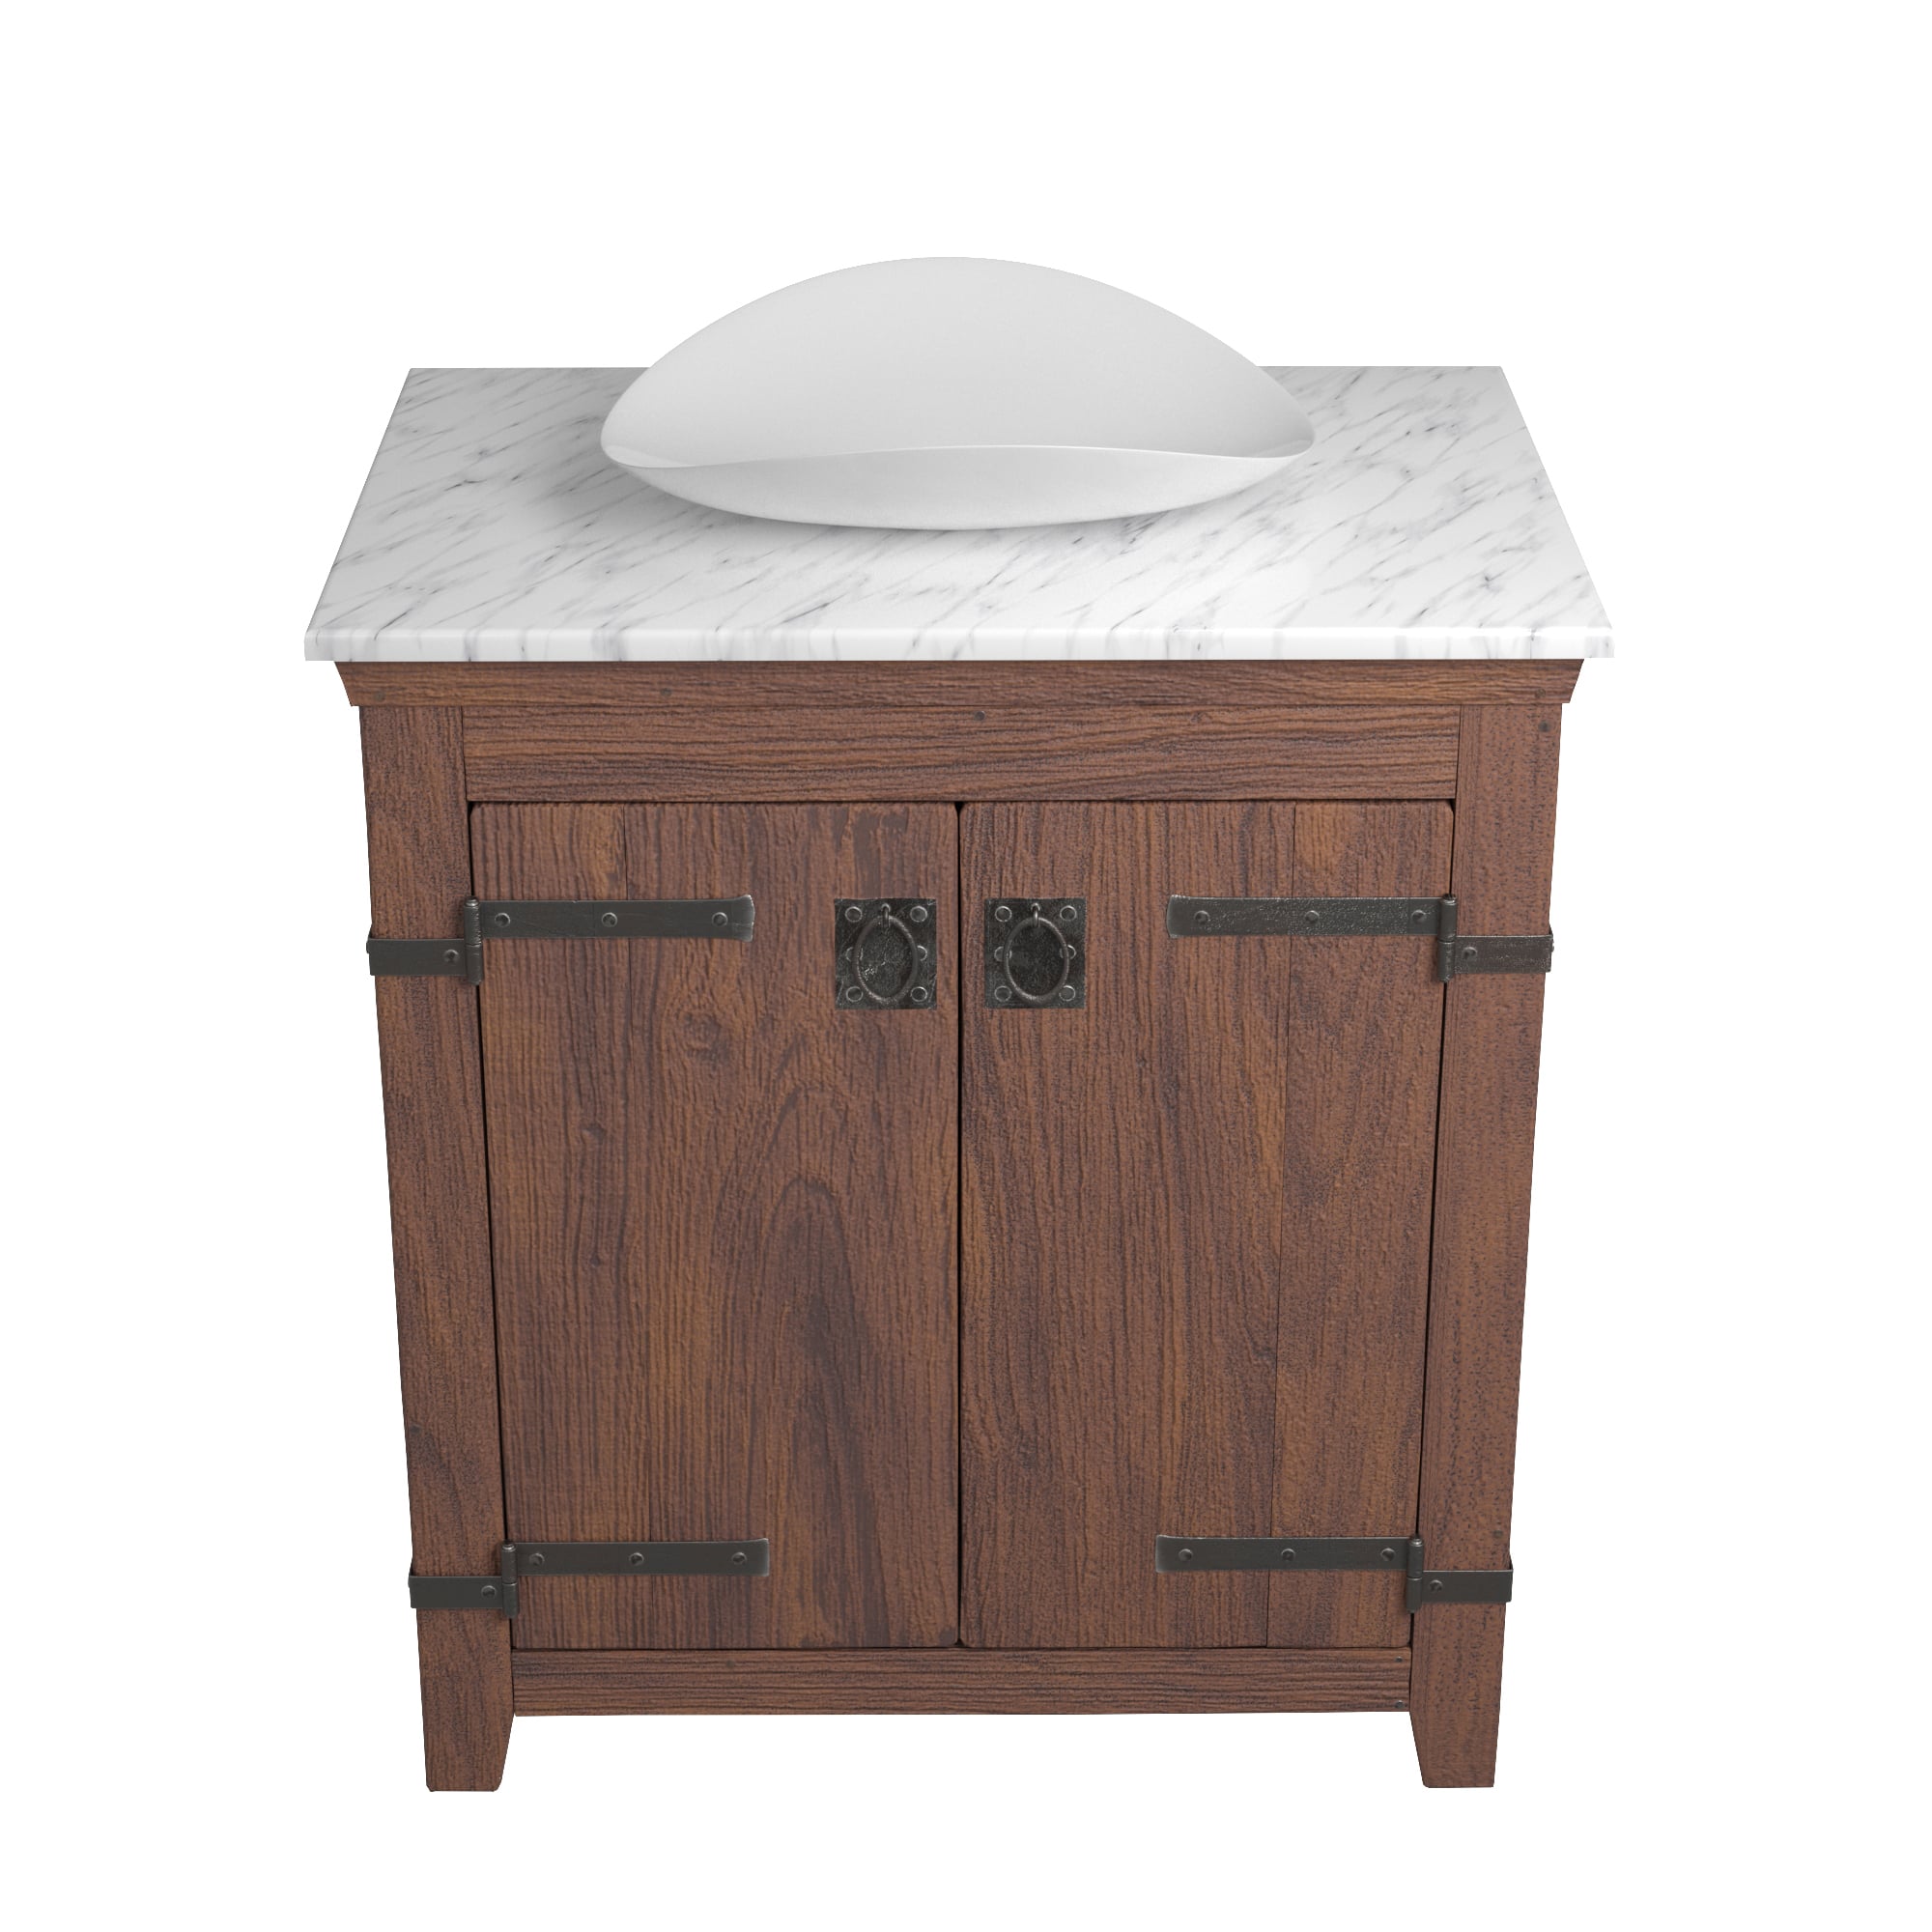 Native Trails 30" Americana Vanity in Chestnut with Carrara Marble Top and Sorrento in Bianco, No Faucet Hole, BND30-VB-CT-MG-100